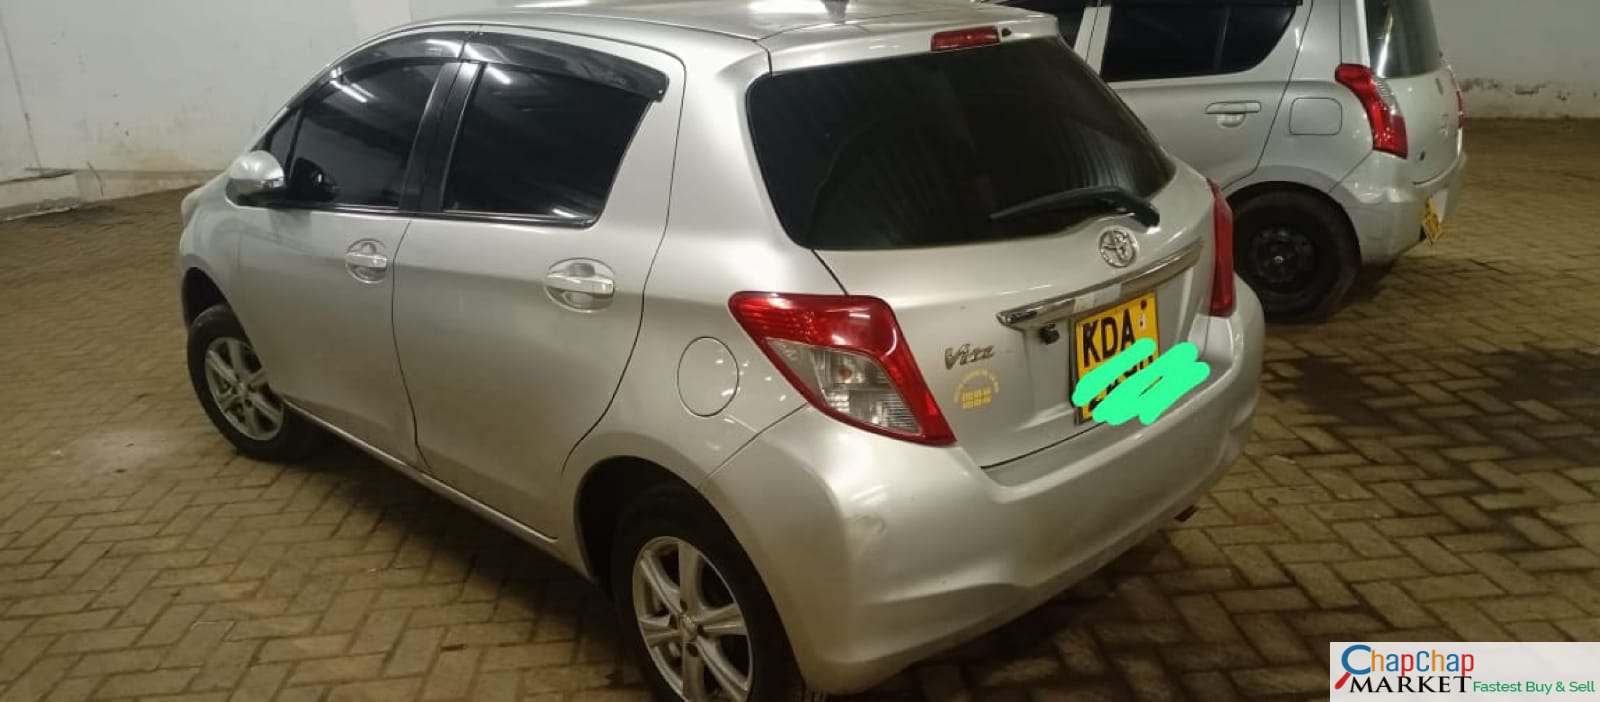 Cars Cars For Sale/Vehicles-Toyota Vitz for sale in Kenya 1300cc You Pay 30% Deposit Trade in OK EXCLUSIVE 4